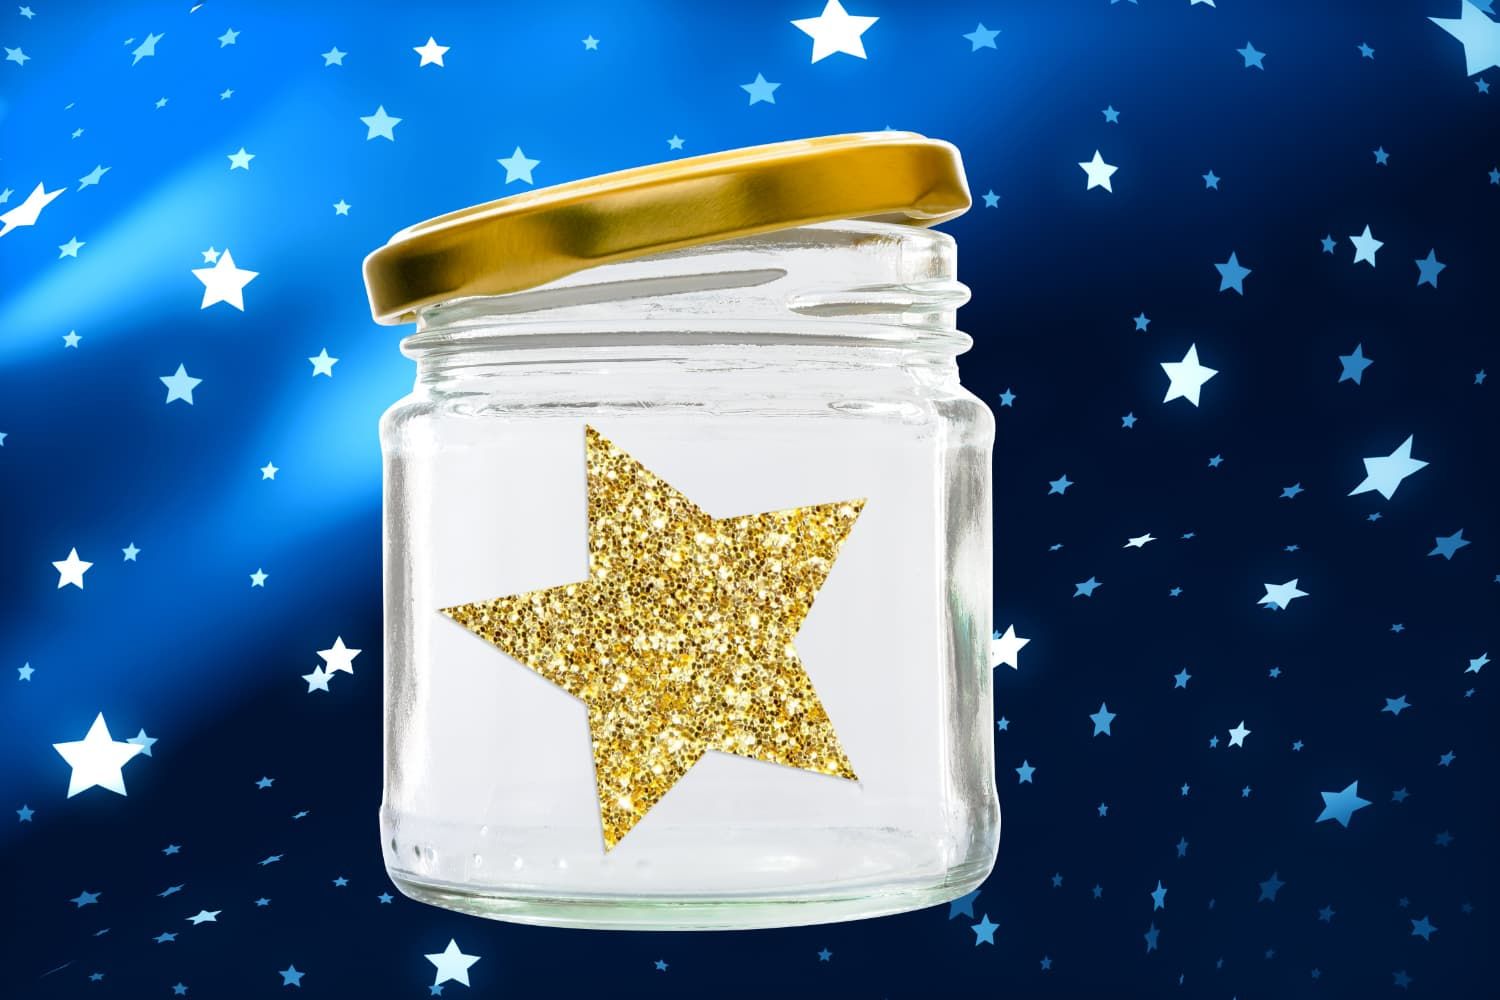 Object%20lesson%20-%20Stars%20in%20a%20jar-6132cbc5 Growth